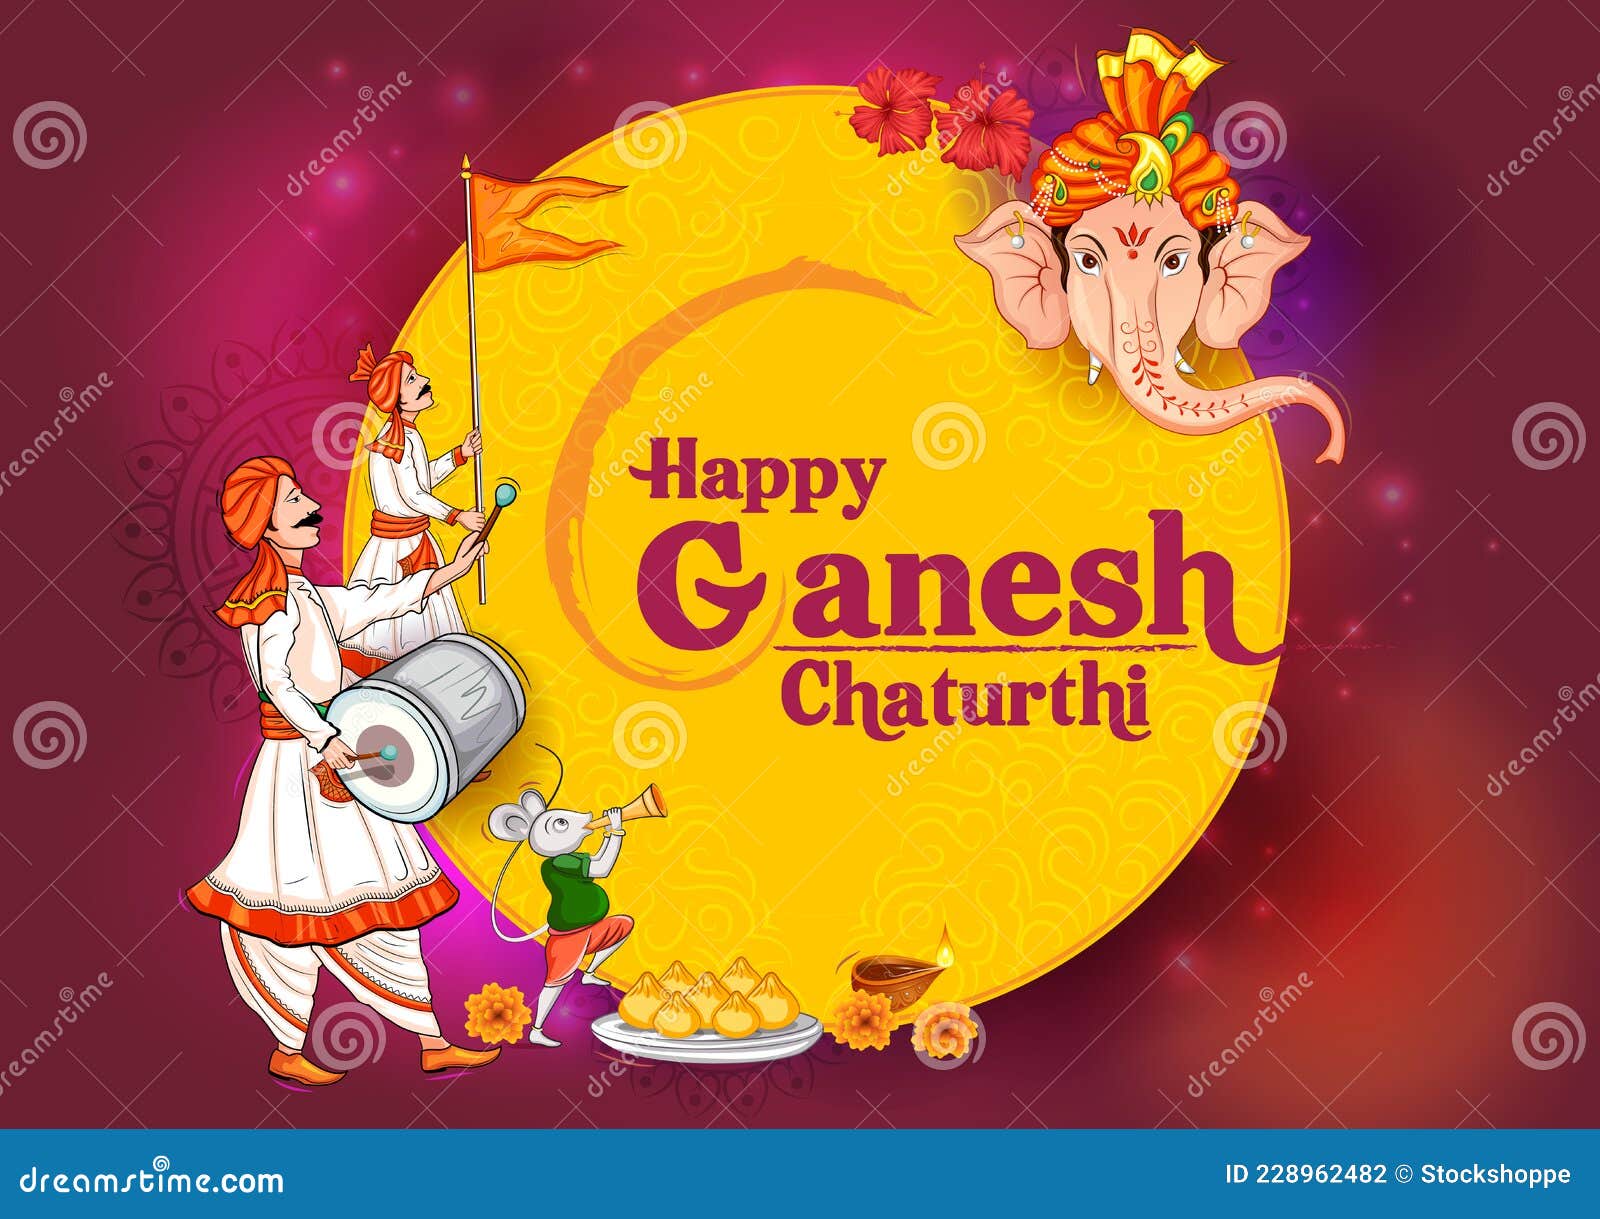 Lord Ganapati for Happy Ganesh Chaturthi Festival Religious Banner  Background Stock Vector - Illustration of luck, lord: 228962482